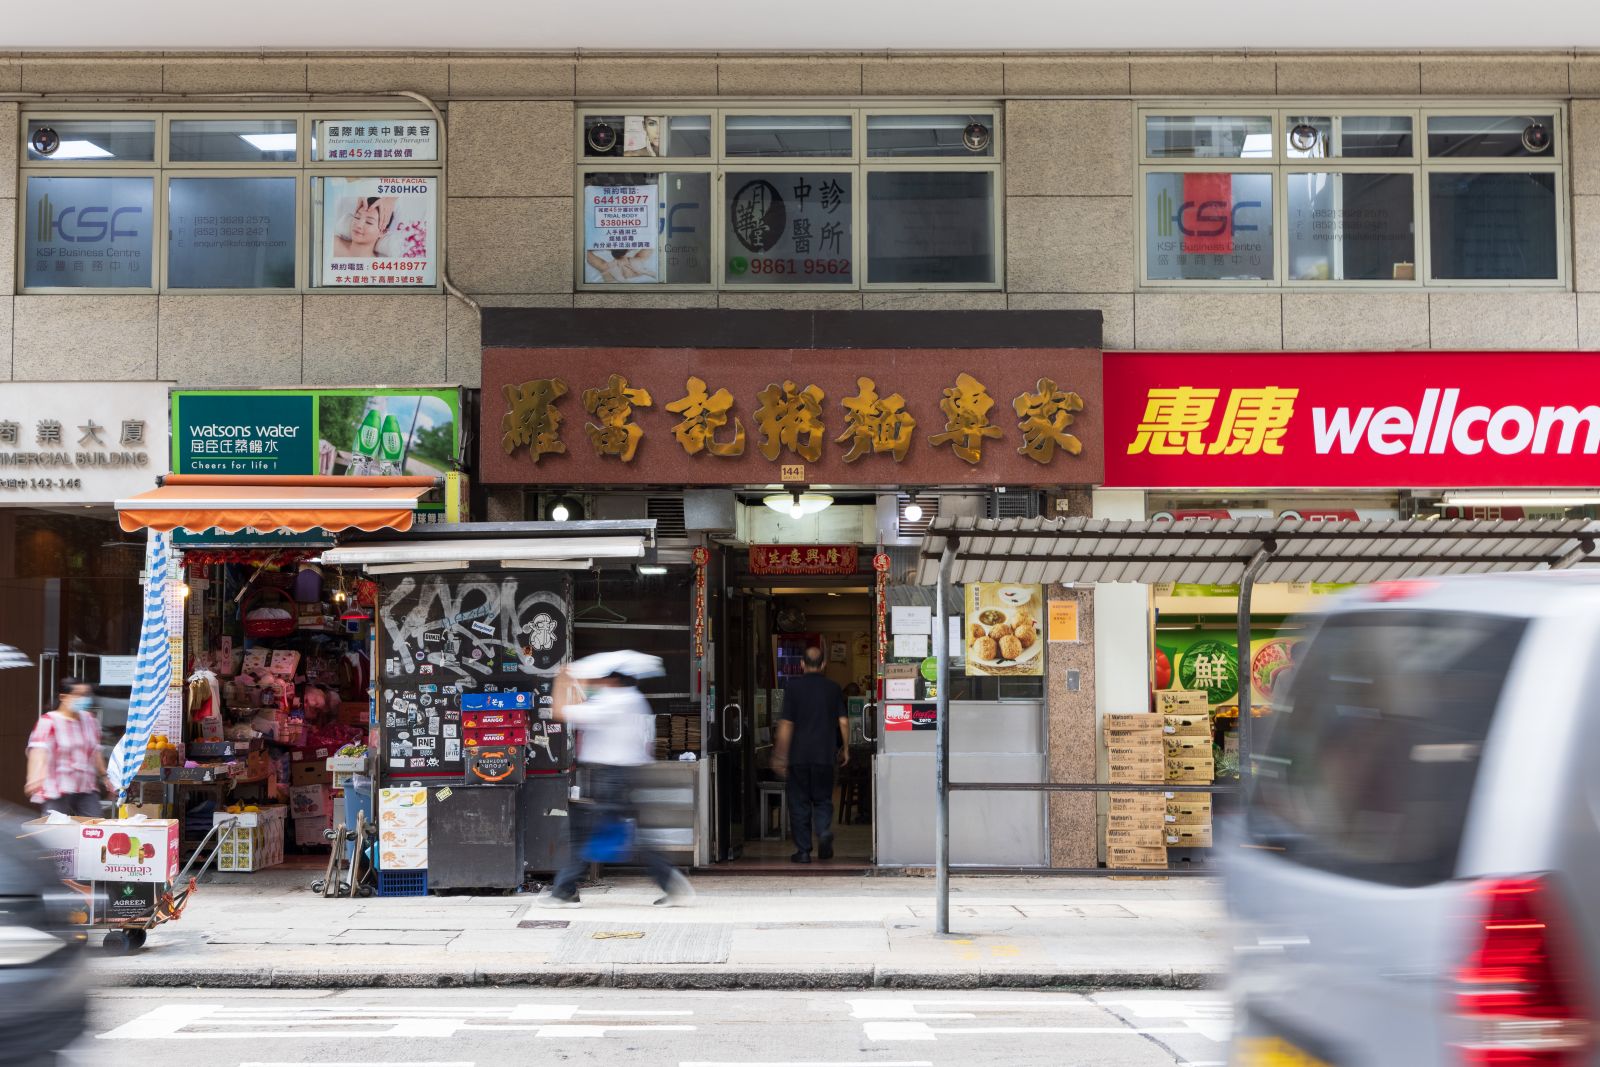 Law Fu Kee in Central is a must-visit for those seeking an authentic breakfast experience.